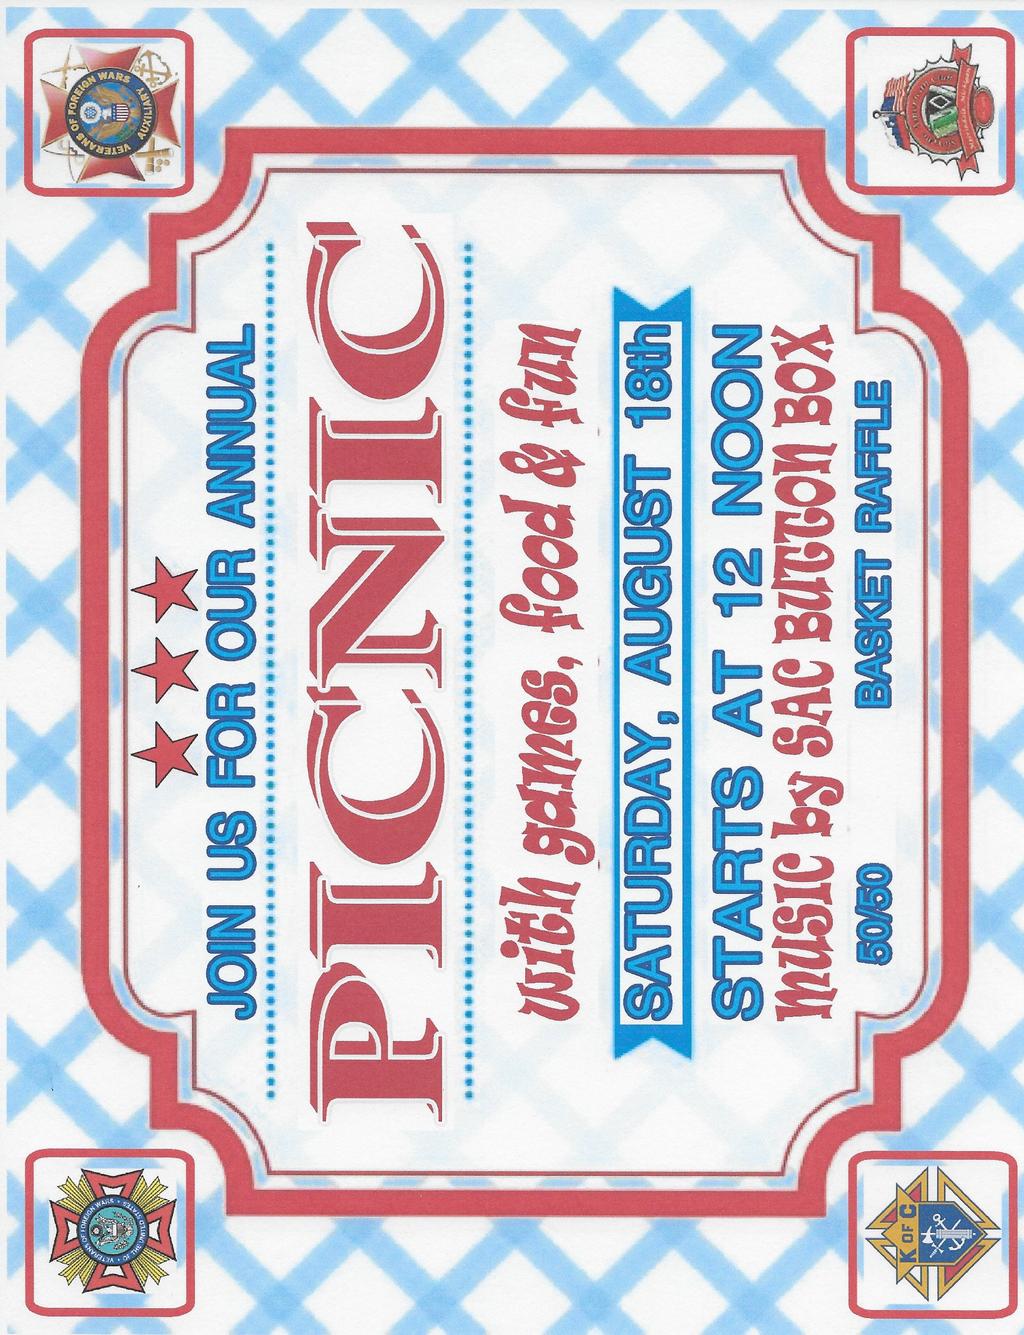 For the PICNIC, SAC Members will be responsible for: 1. Music from 12:00 pm to 6:00 pm on the indoor stage in the hall. Please coordinate this with Mike Masten (734-368-2240).